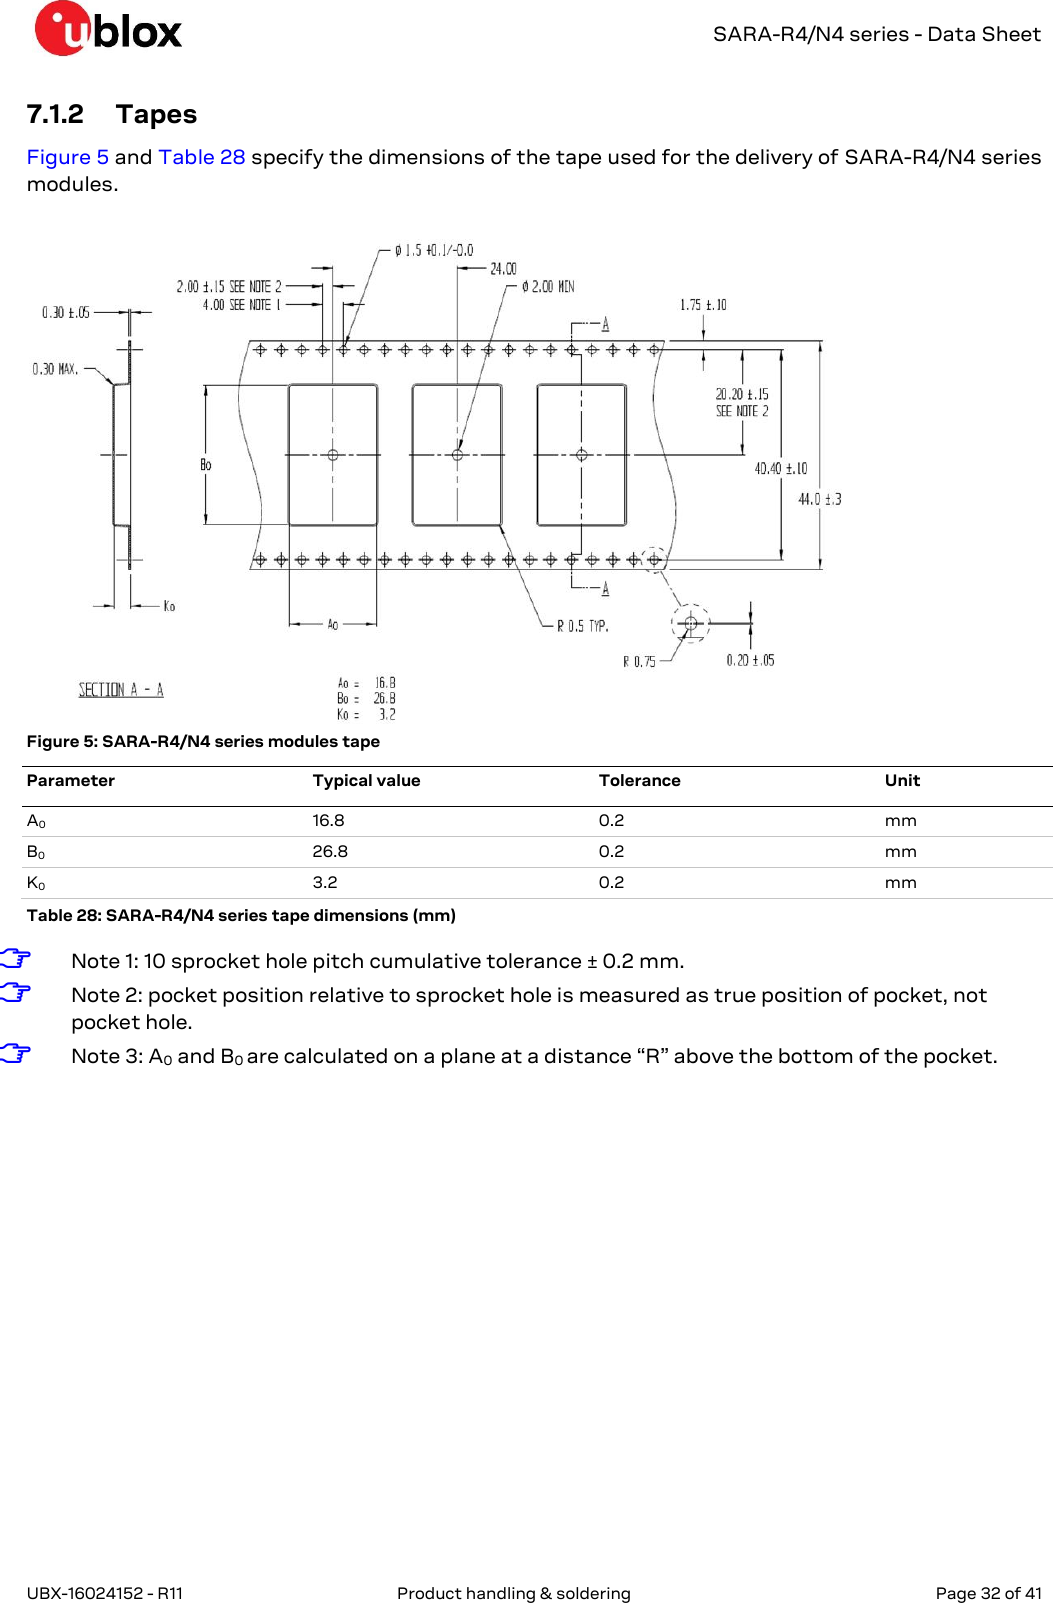   SARA-R4/N4 series - Data Sheet UBX-16024152 - R11  Product handling &amp; soldering   Page 32 of 41      7.1.2 Tapes Figure 5 and Table 28 specify the dimensions of the tape used for the delivery of SARA-R4/N4 series modules.   Figure 5: SARA-R4/N4 series modules tape Parameter Typical value Tolerance Unit A0 16.8 0.2 mm B0 26.8 0.2 mm K0 3.2 0.2 mm Table 28: SARA-R4/N4 series tape dimensions (mm) ☞ Note 1: 10 sprocket hole pitch cumulative tolerance ± 0.2 mm. ☞ Note 2: pocket position relative to sprocket hole is measured as true position of pocket, not pocket hole. ☞ Note 3: A0 and B0 are calculated on a plane at a distance “R” above the bottom of the pocket.  